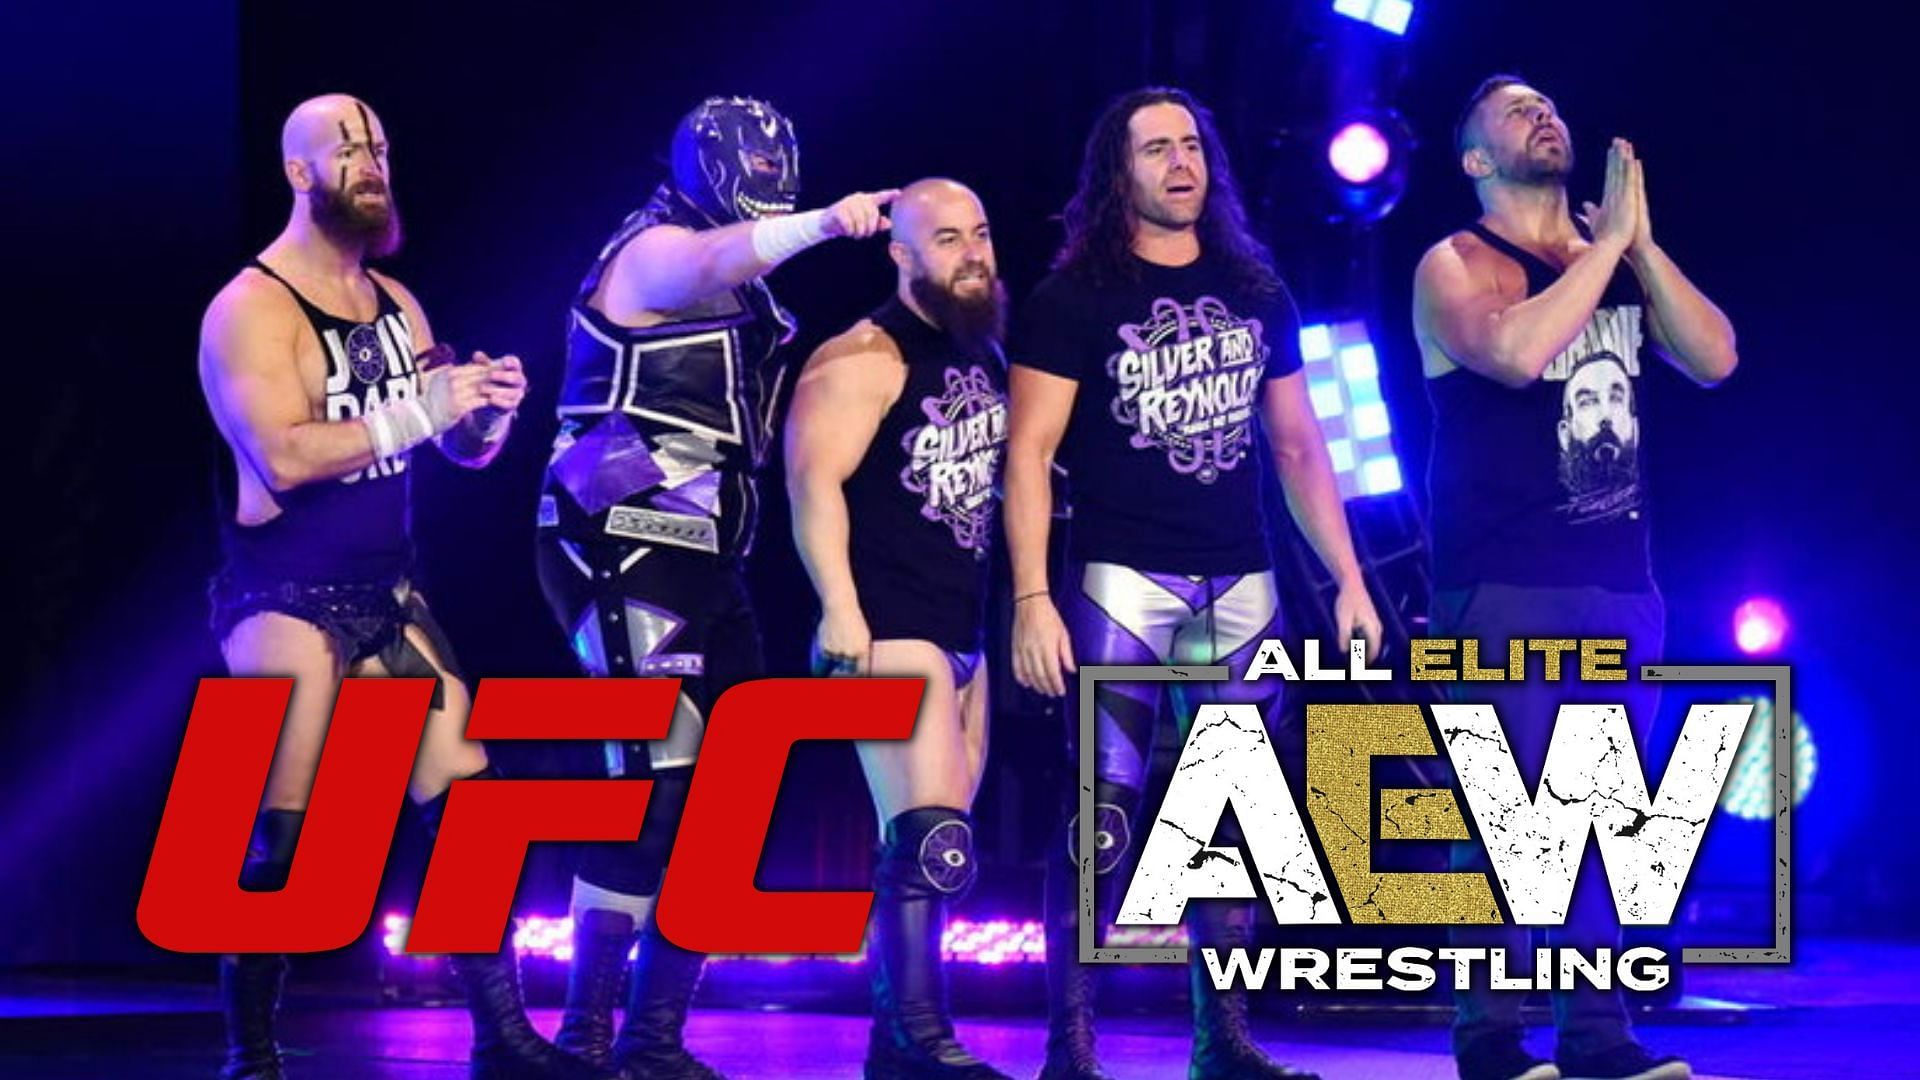 The Dark Order is one of AEW